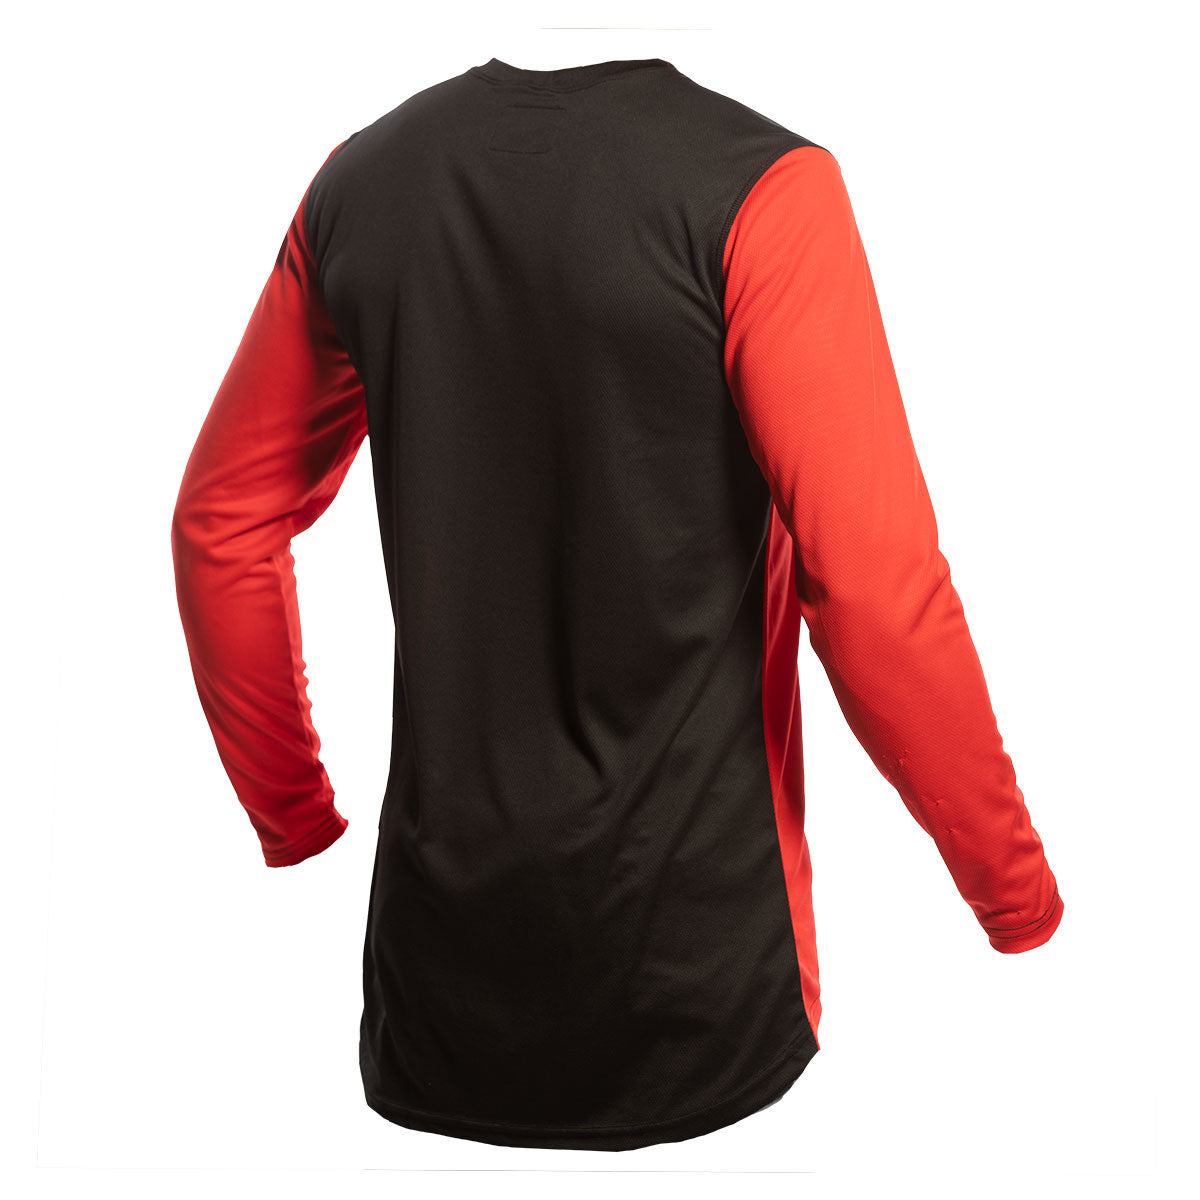 Fasthouse Carbon Jersey - Red